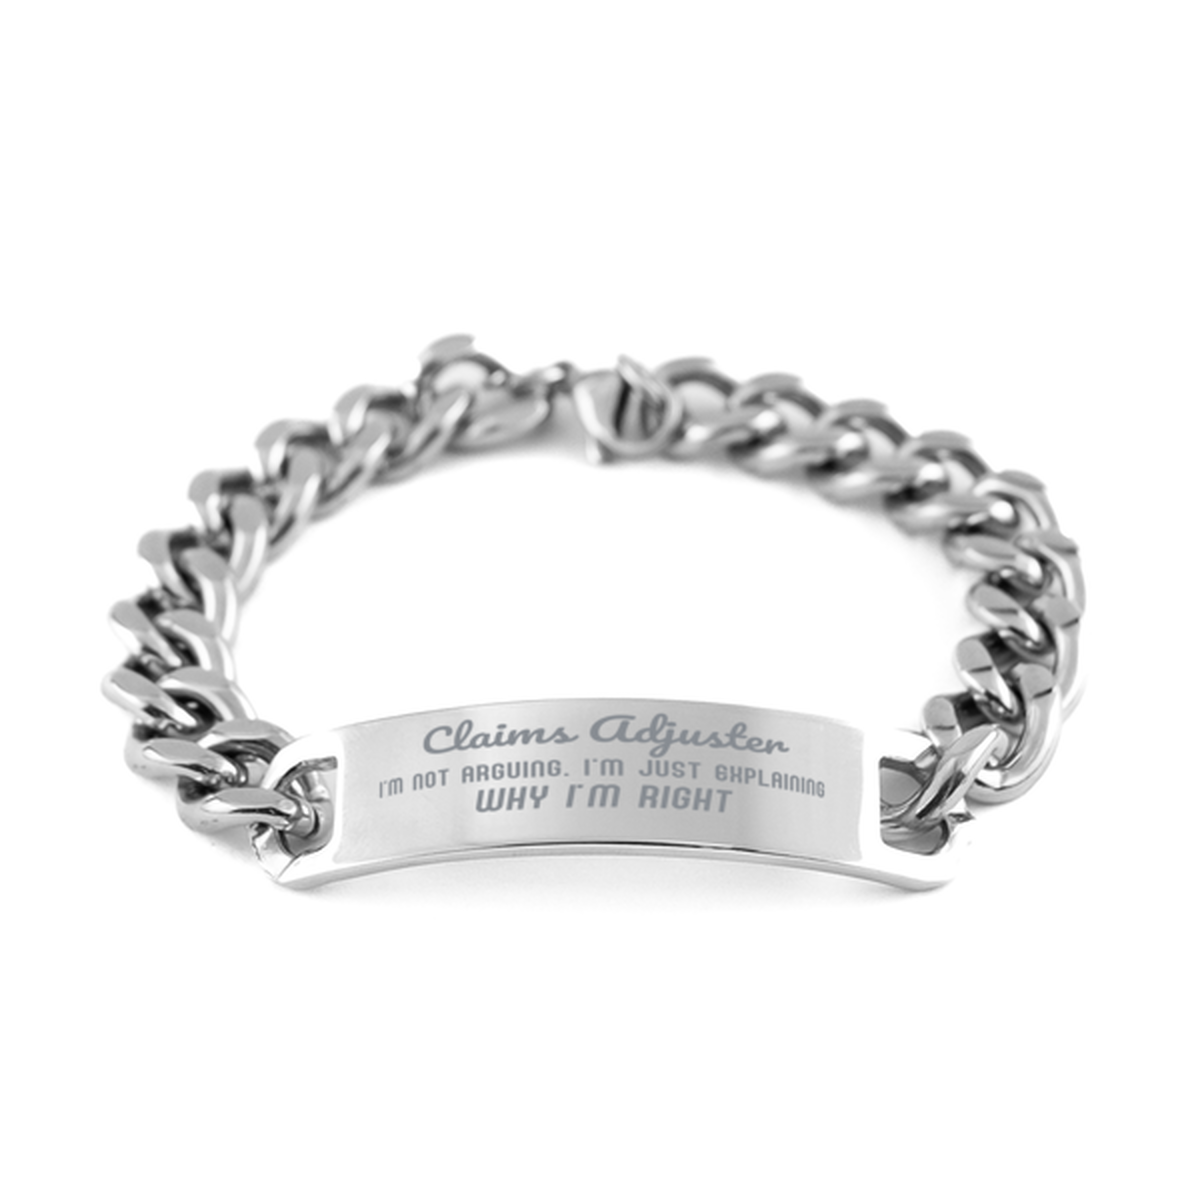 Claims Adjuster I'm not Arguing. I'm Just Explaining Why I'm RIGHT Cuban Chain Stainless Steel Bracelet, Graduation Birthday Christmas Claims Adjuster Gifts For Claims Adjuster Funny Saying Quote Present for Men Women Coworker